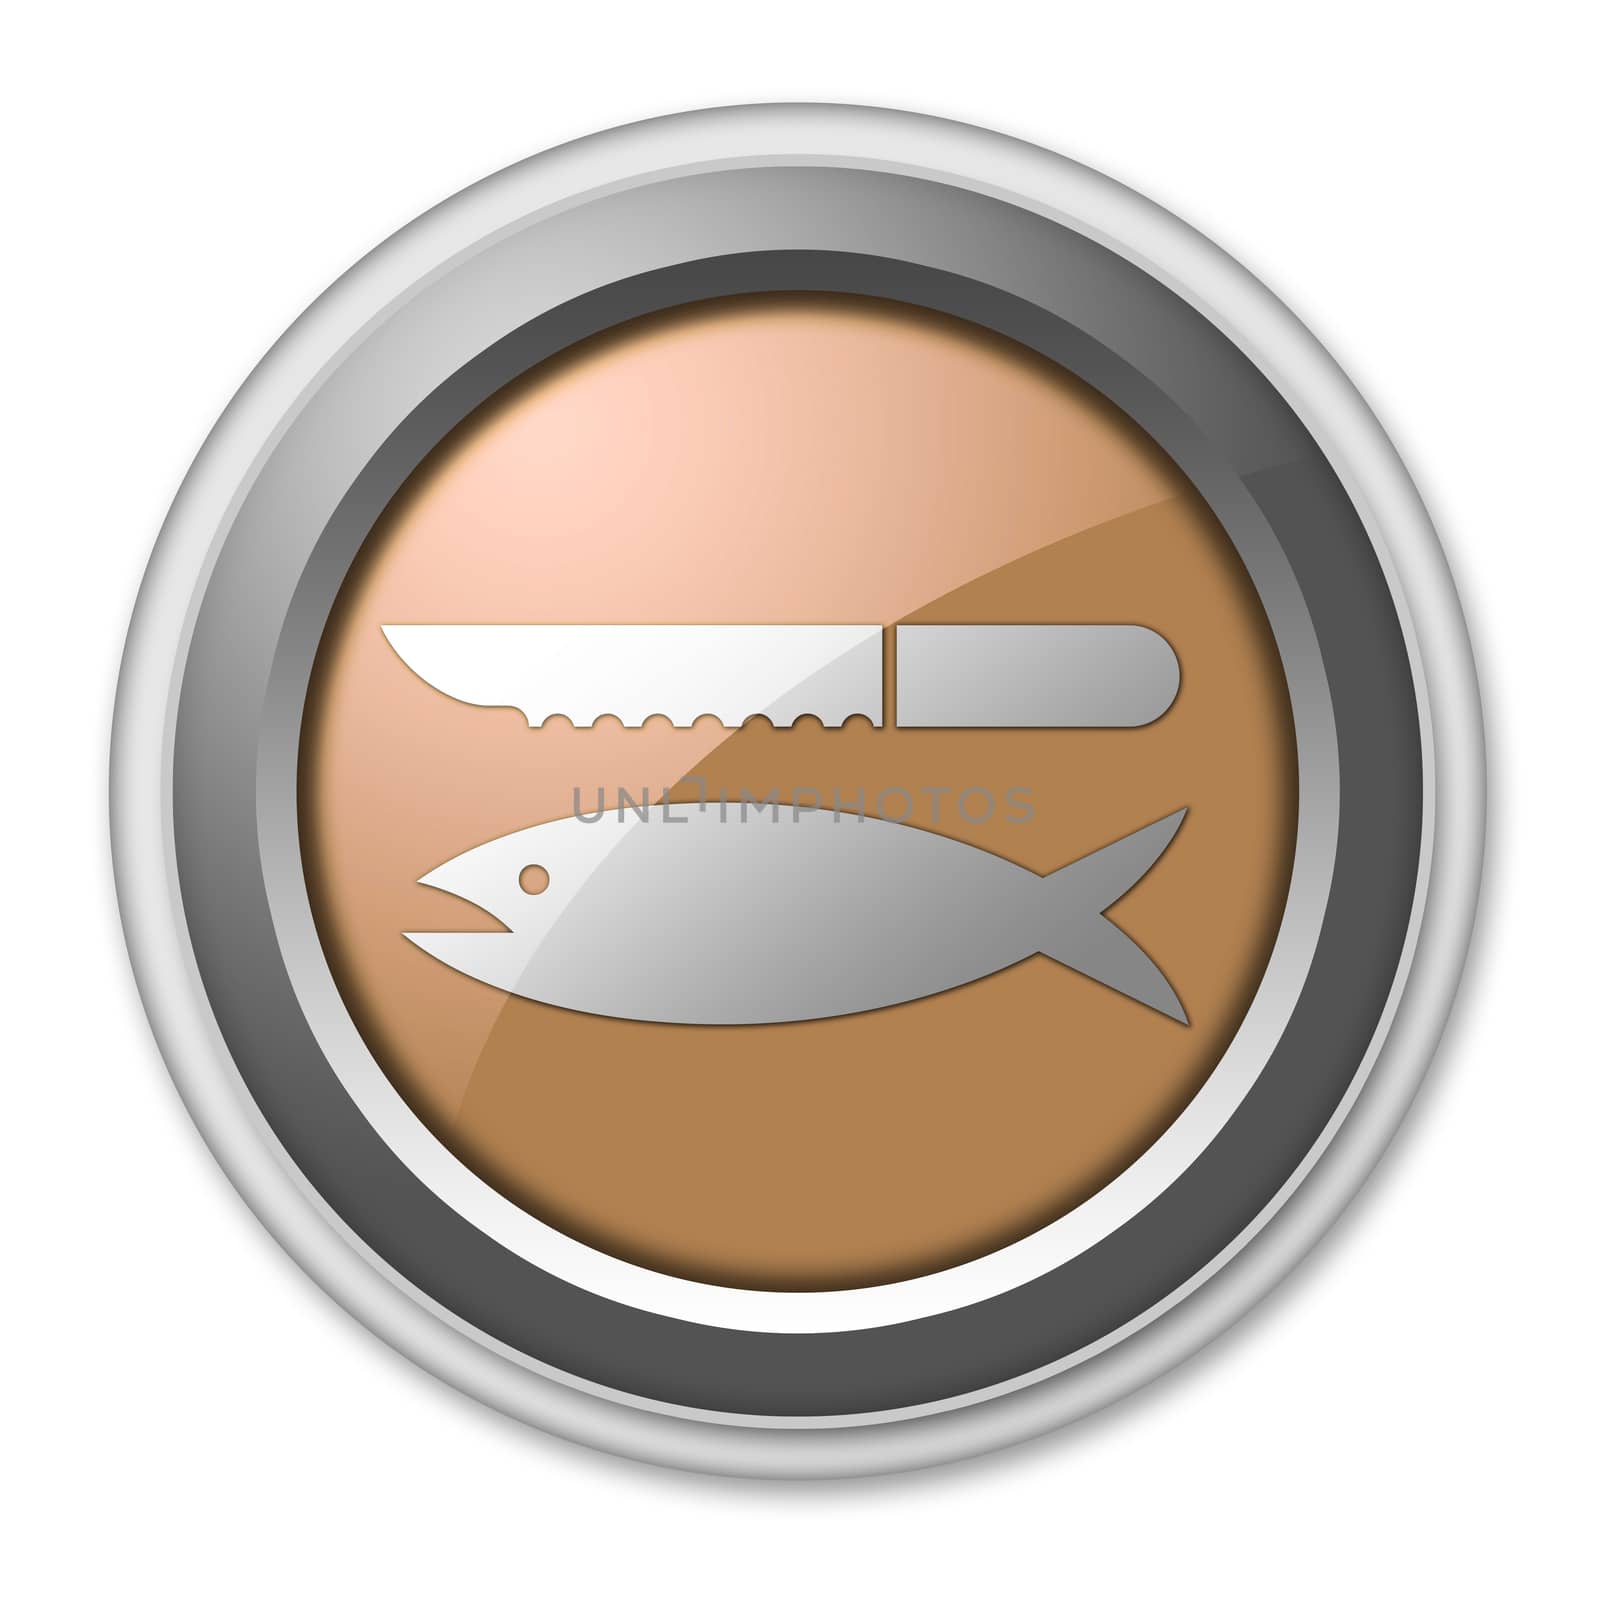 Icon, Button, Pictogram Fish Cleaning by mindscanner